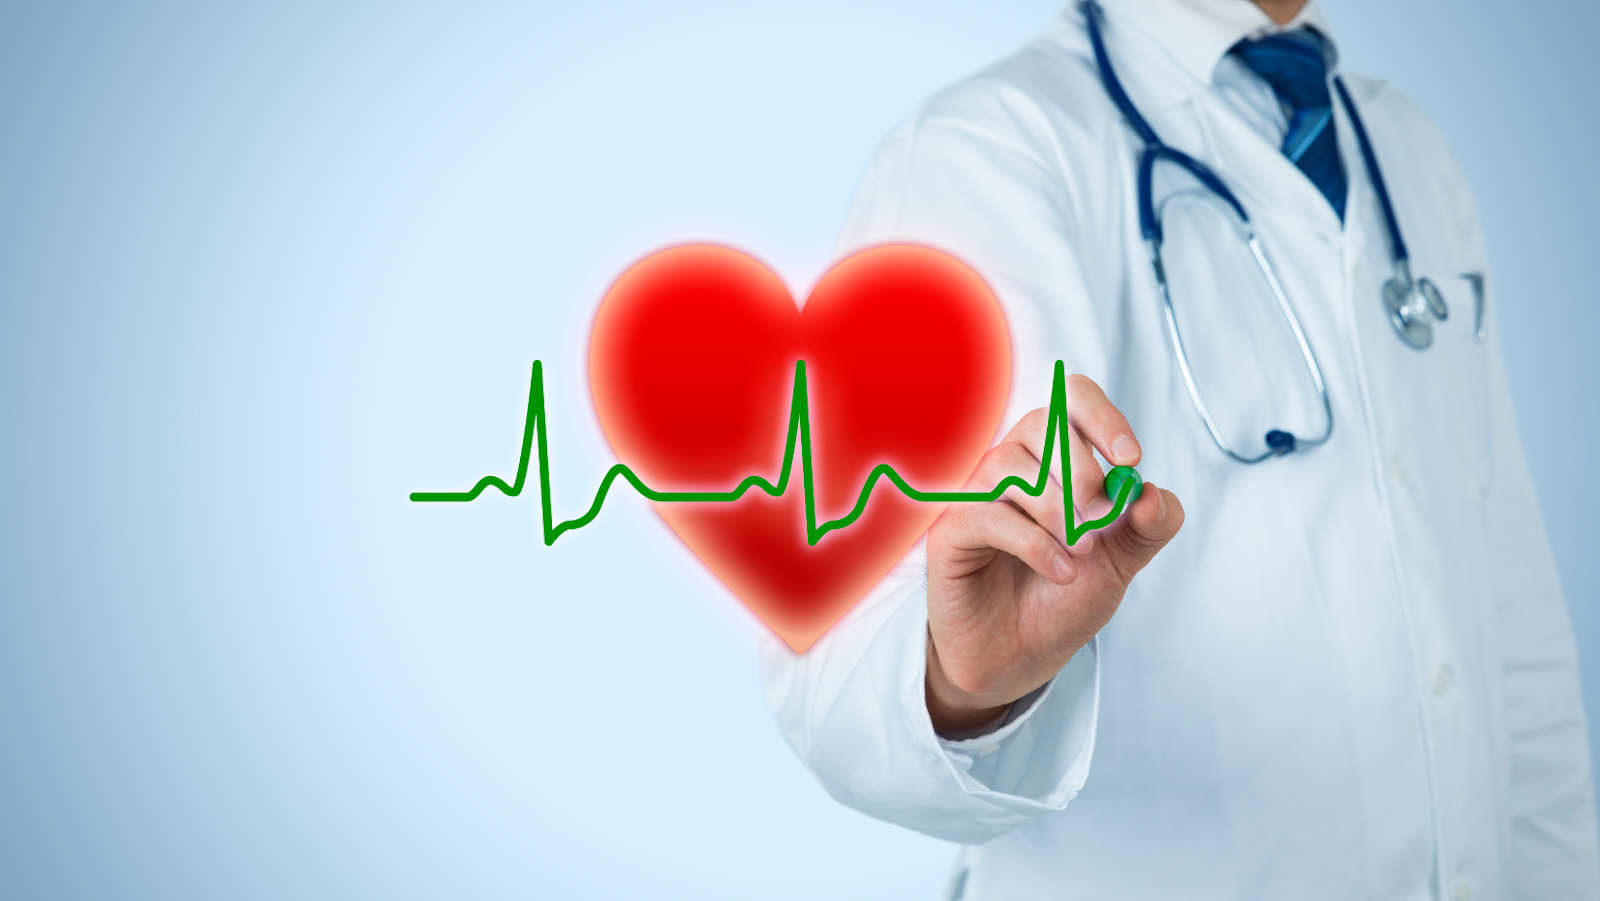 Heart Conditions and How to Deal With Them